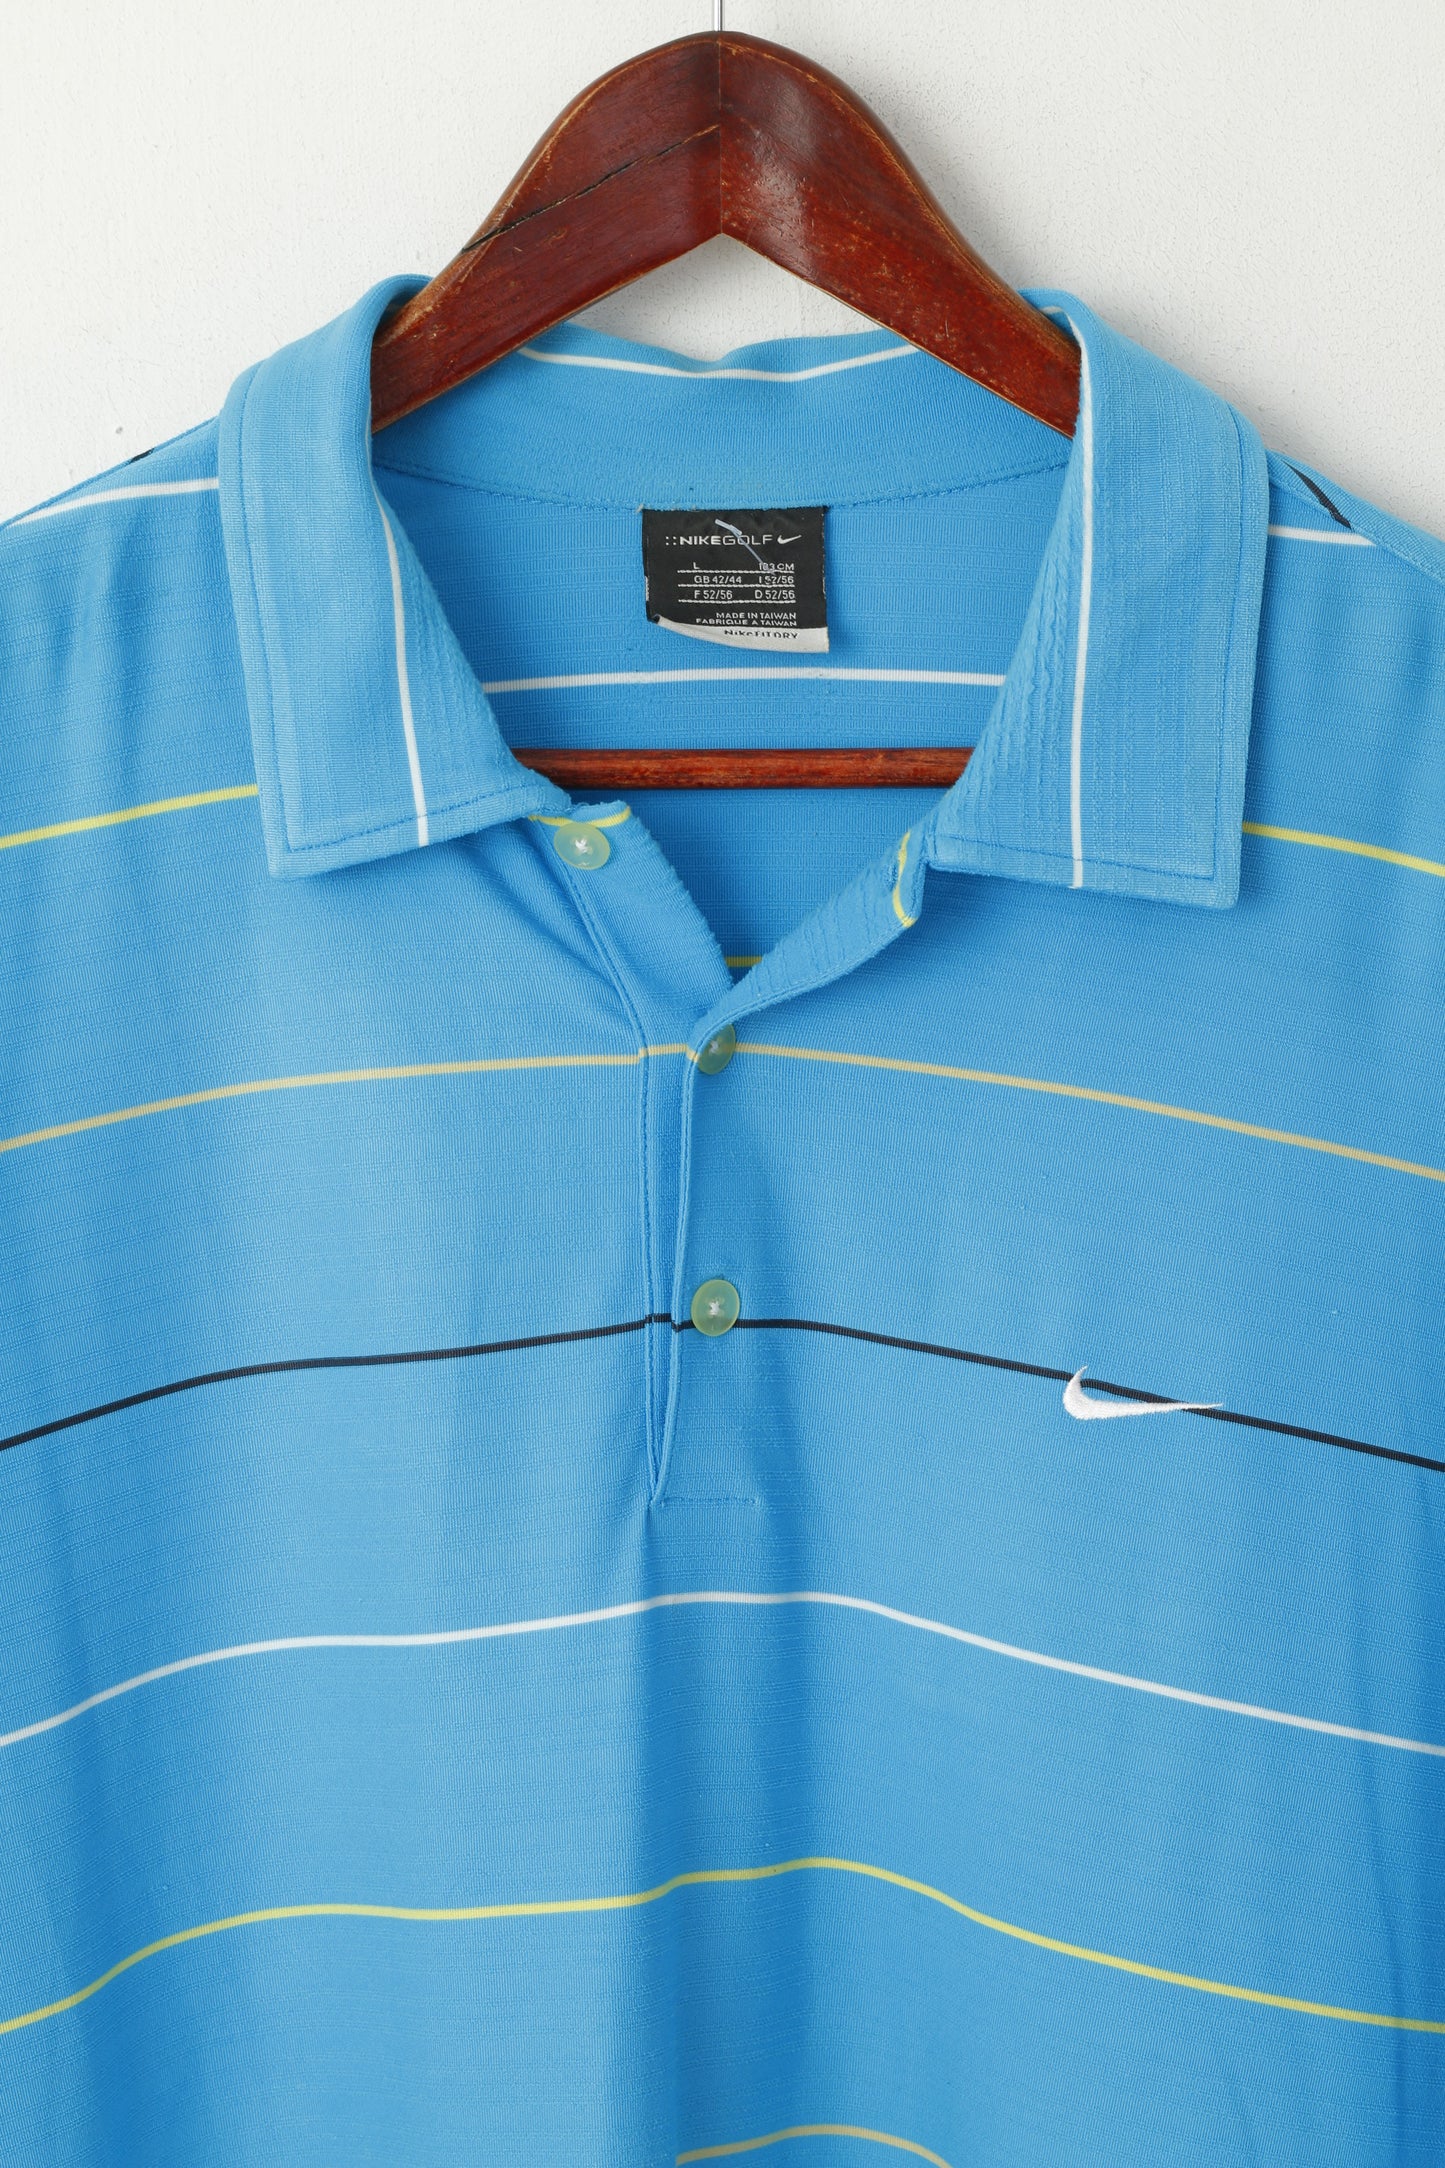 Nike Golf Men L Polo Shirt Turquoise Striped Sport Stretch Activewear Top